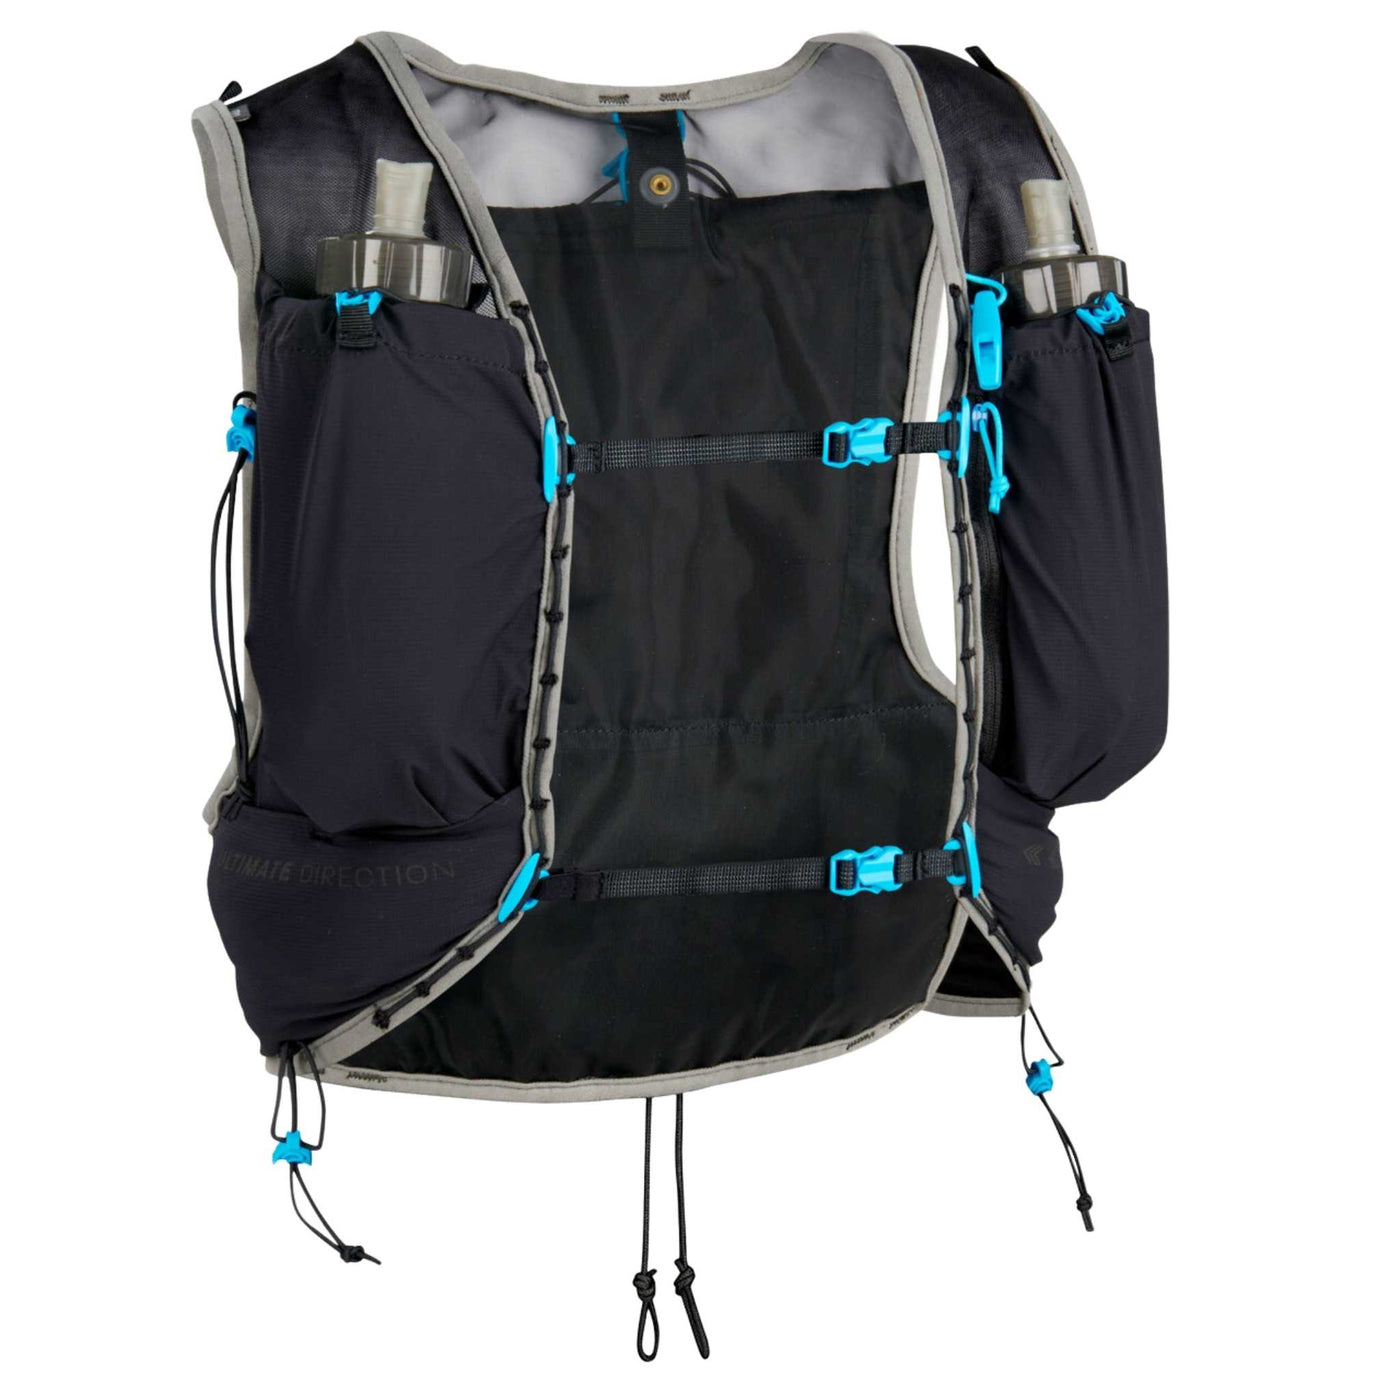 Ultimate Direction Race Vest 6.0 | Men's Hydration Packs and Vests NZ | Further Faster Christchurch NZ #onyx